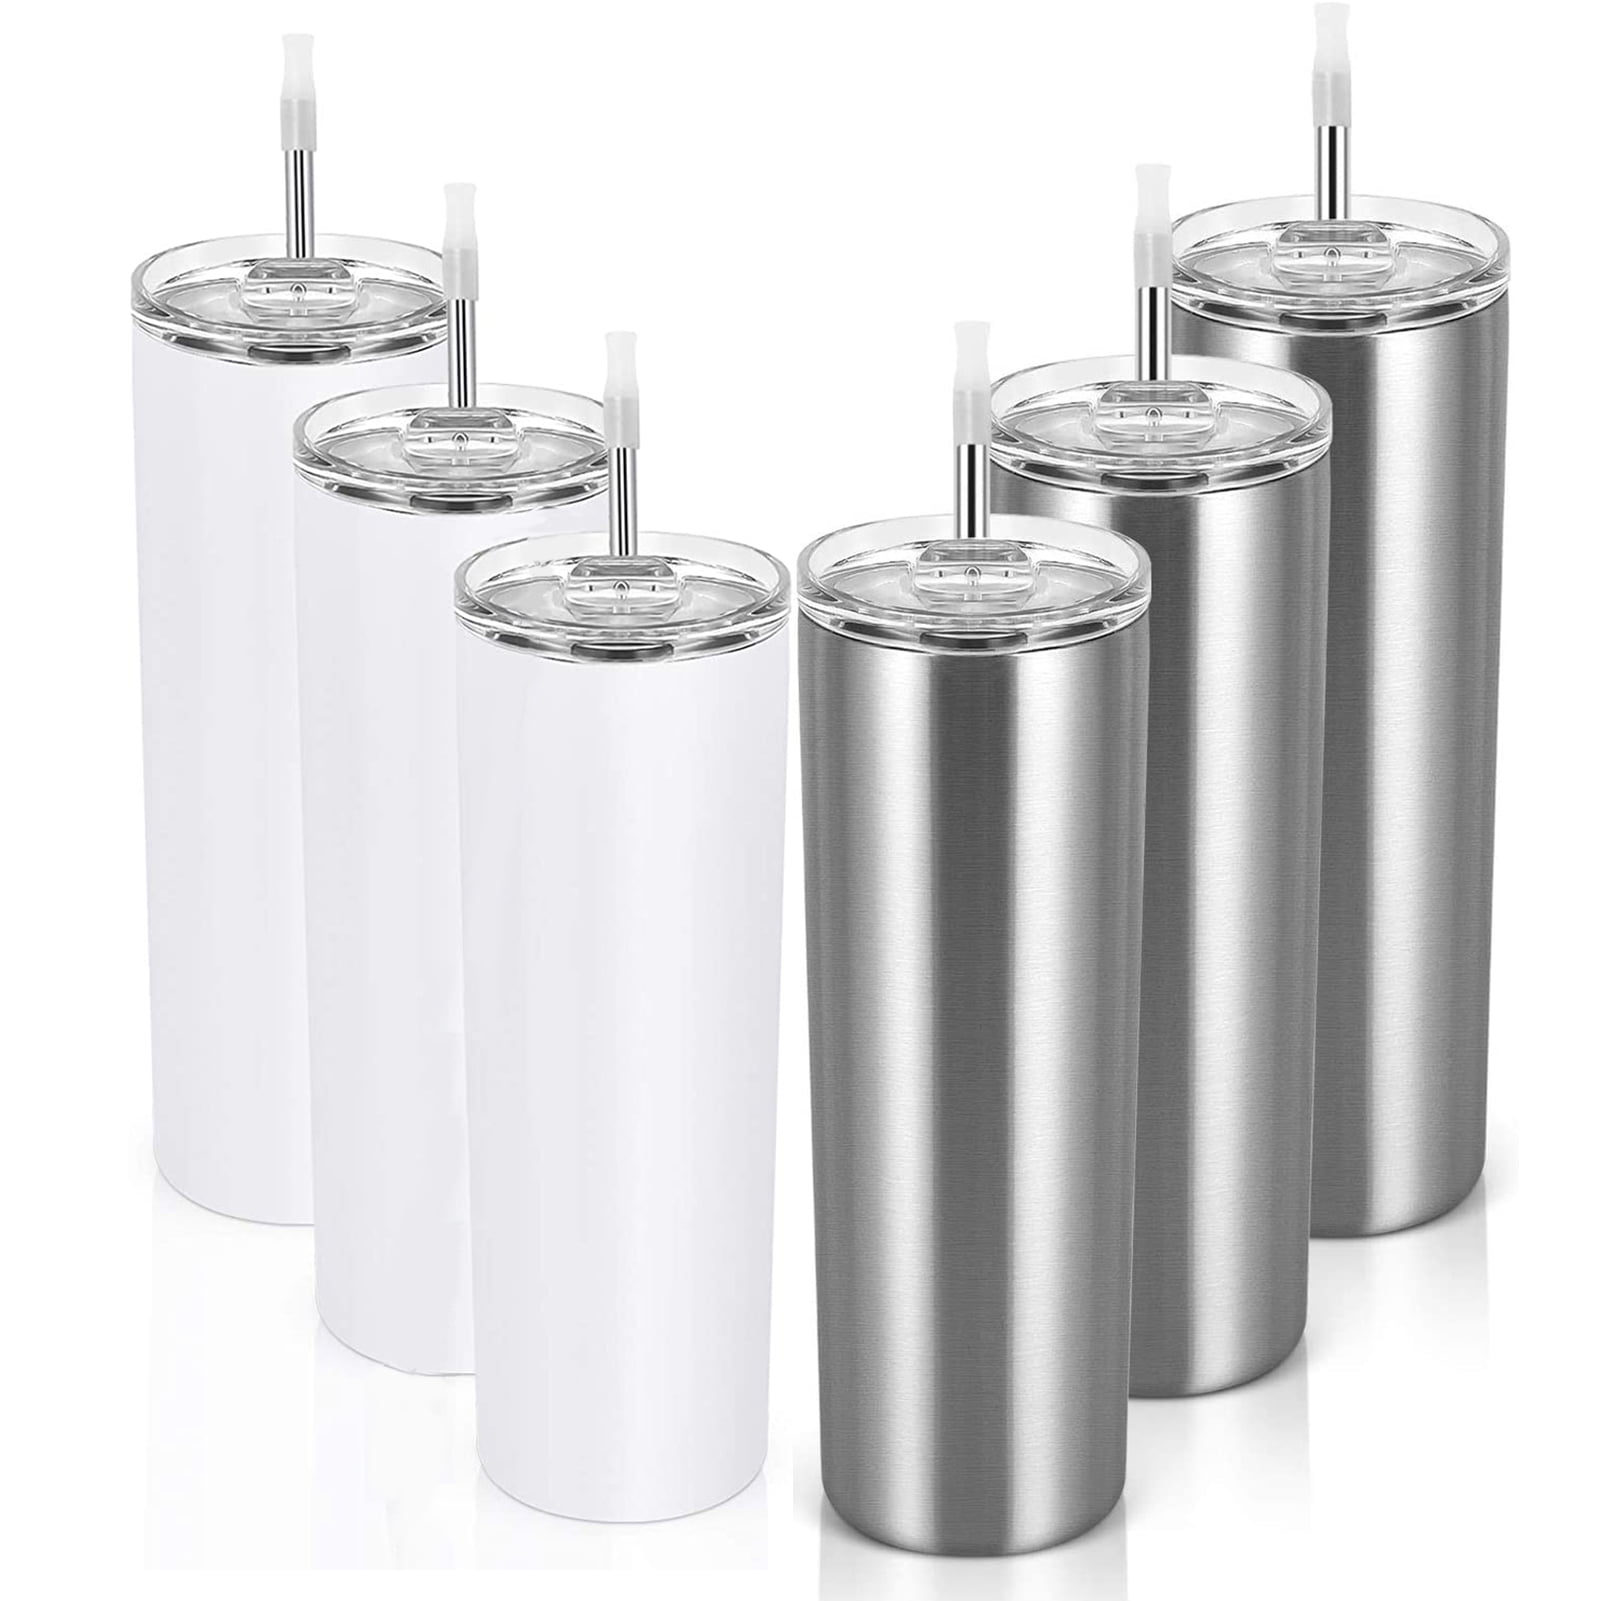 Wholesale Stainless Steel Skinny Tumbler with Lid and Straw - OrcaFlask